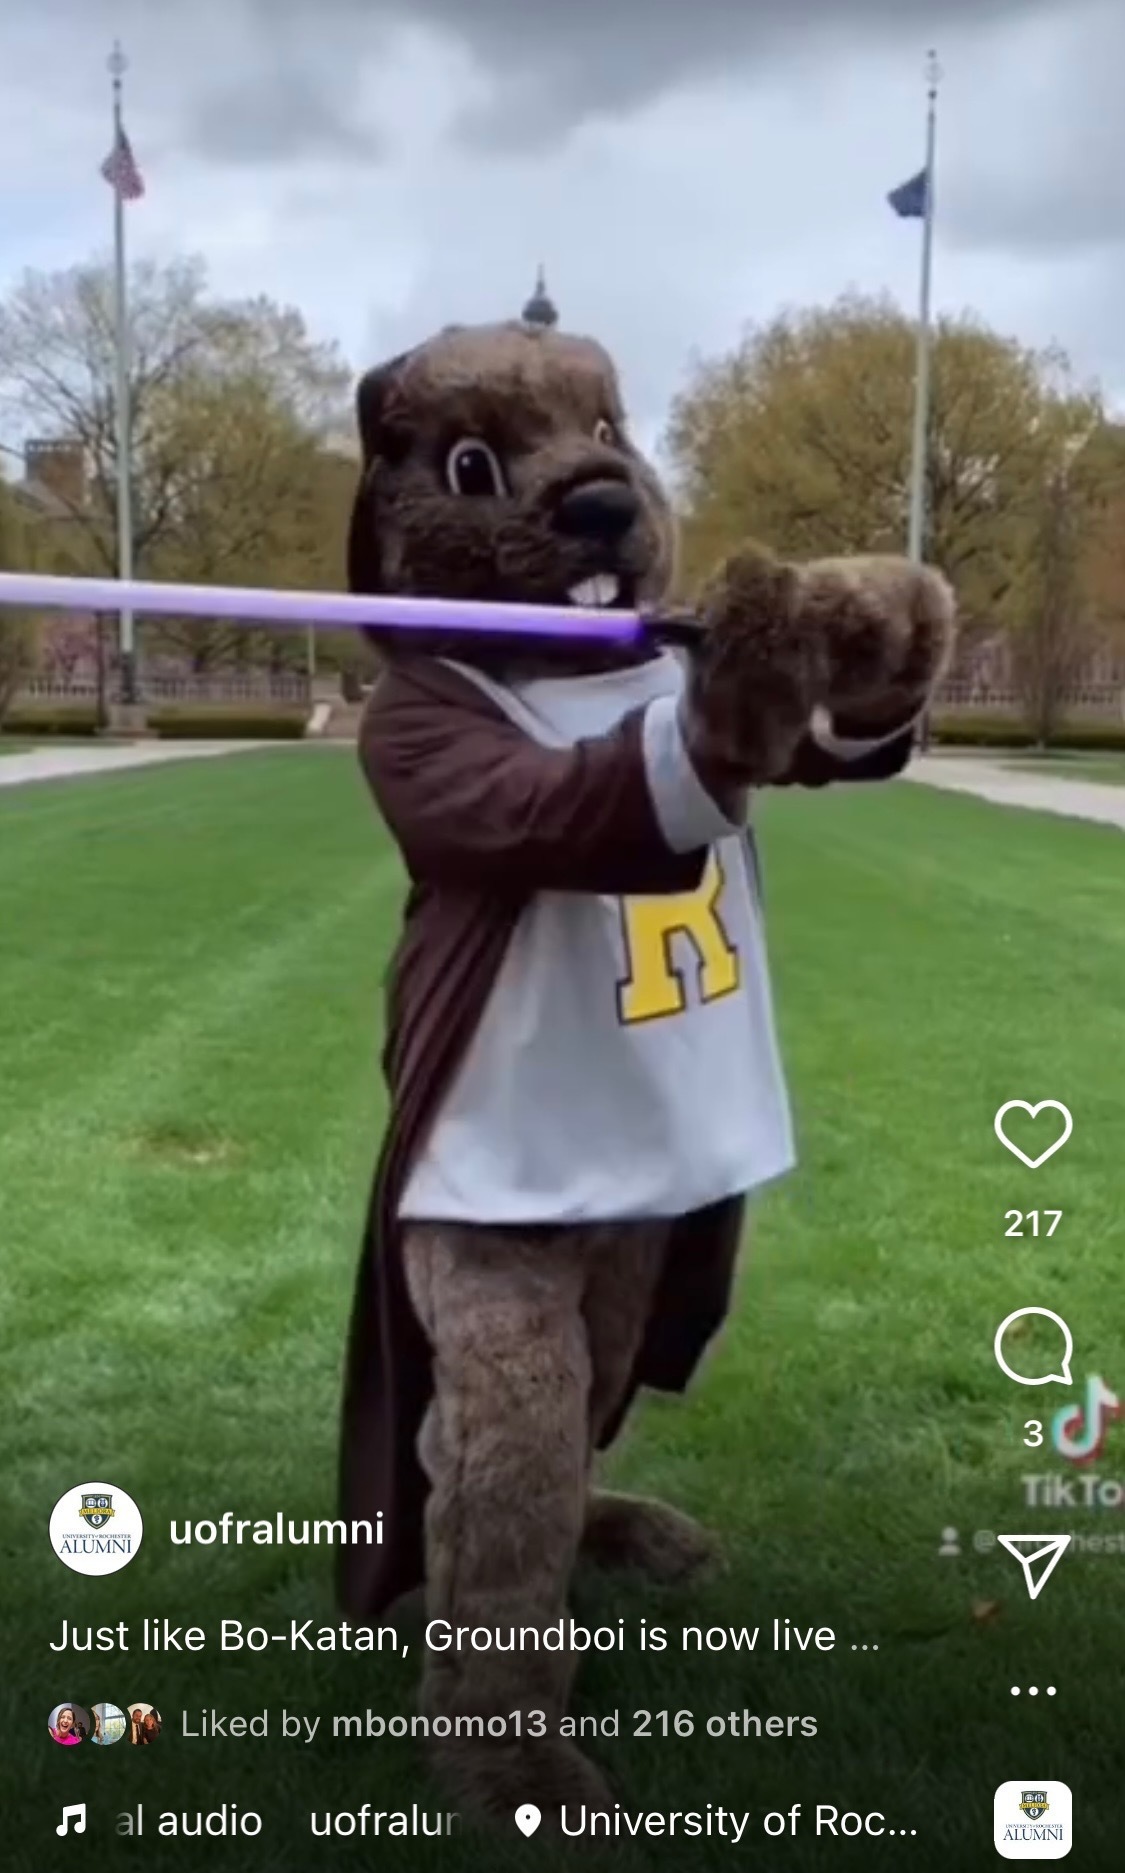 Groundboi holds light saber and celebrates May the 4th be with you!